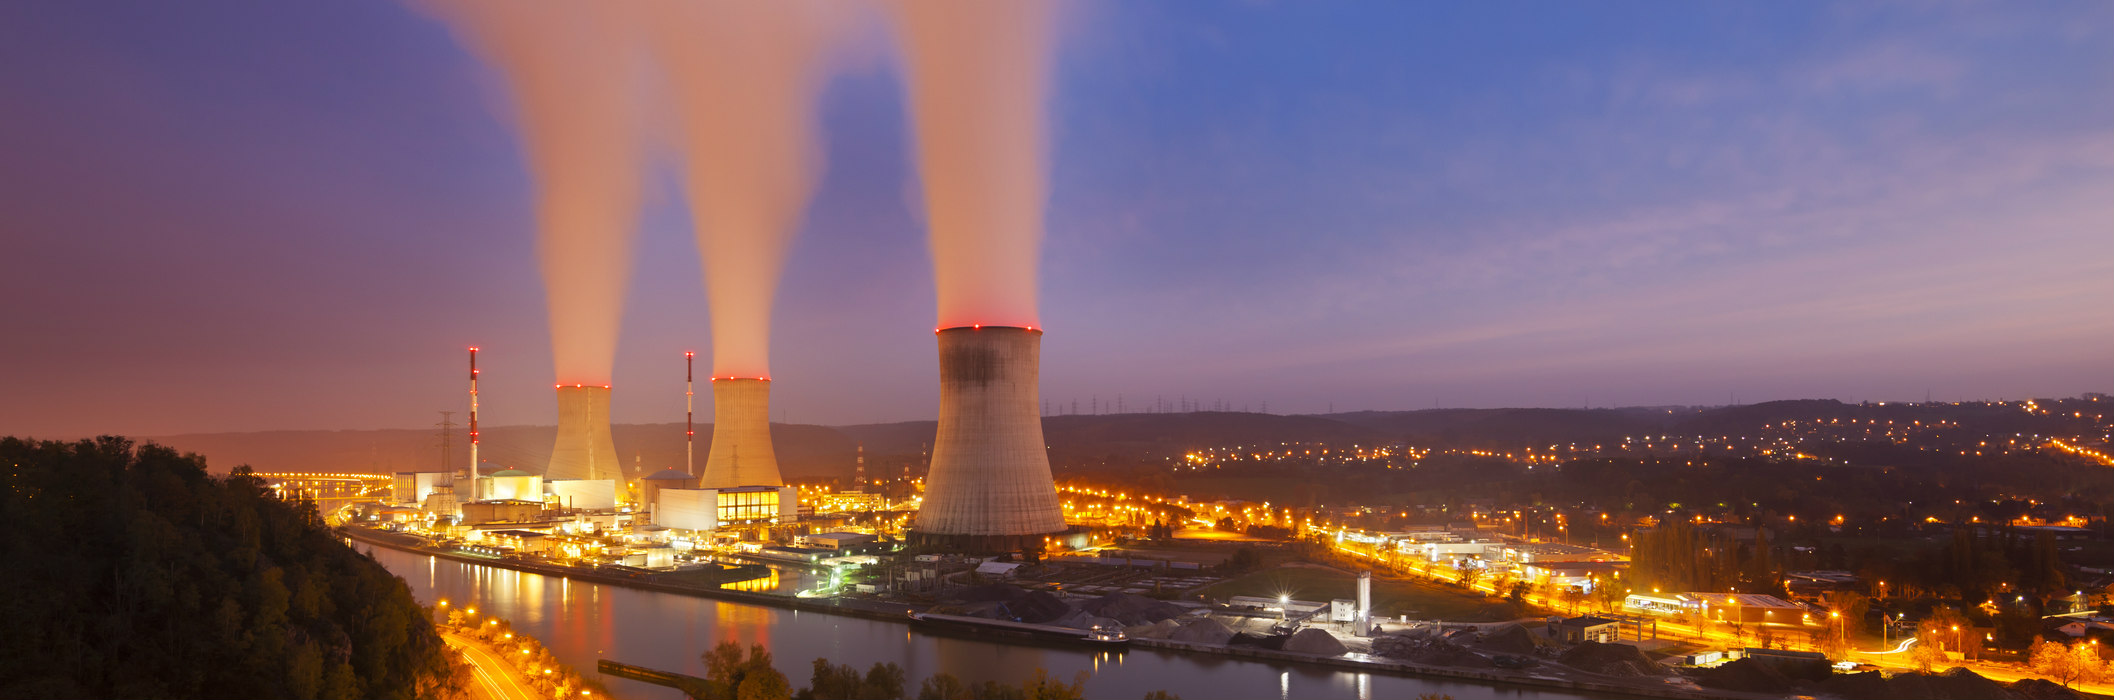 Security Lancaster's research will help protect critical infrastructure such as power stations.